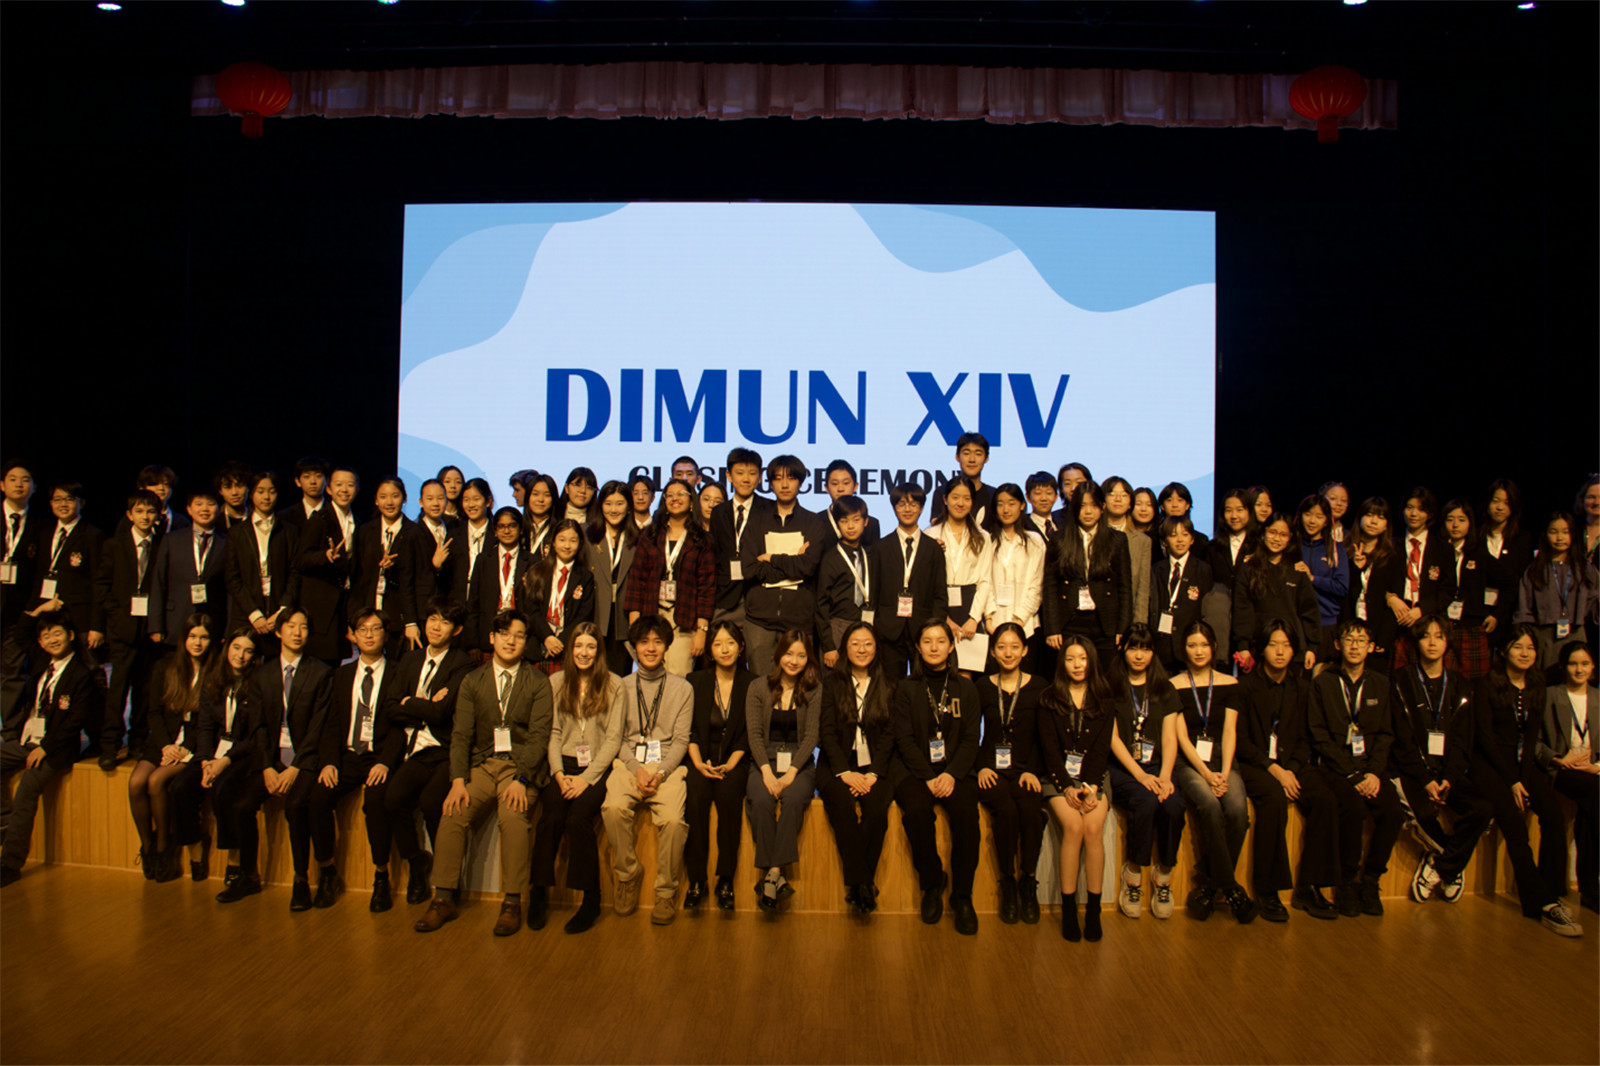 Dulwich International Model United Nations conference